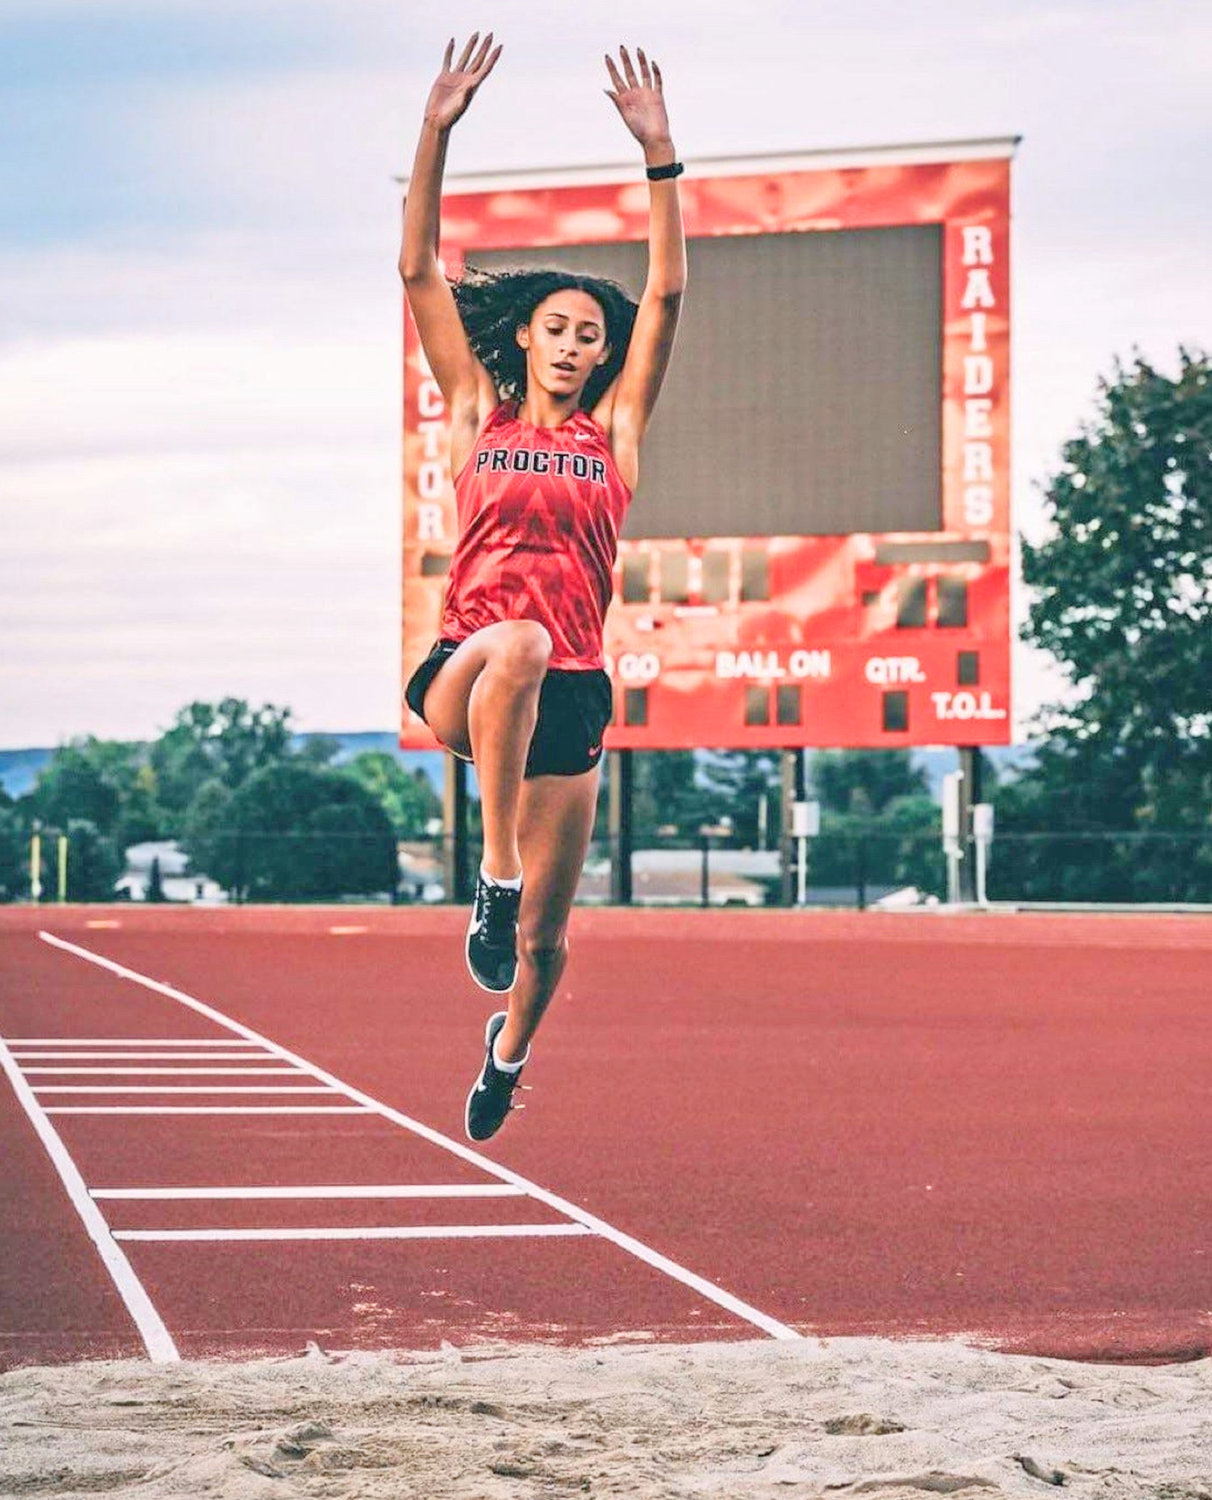 Thomas R. Proctor’s Tamiah Washington earned first in two events at the state track and field championships.